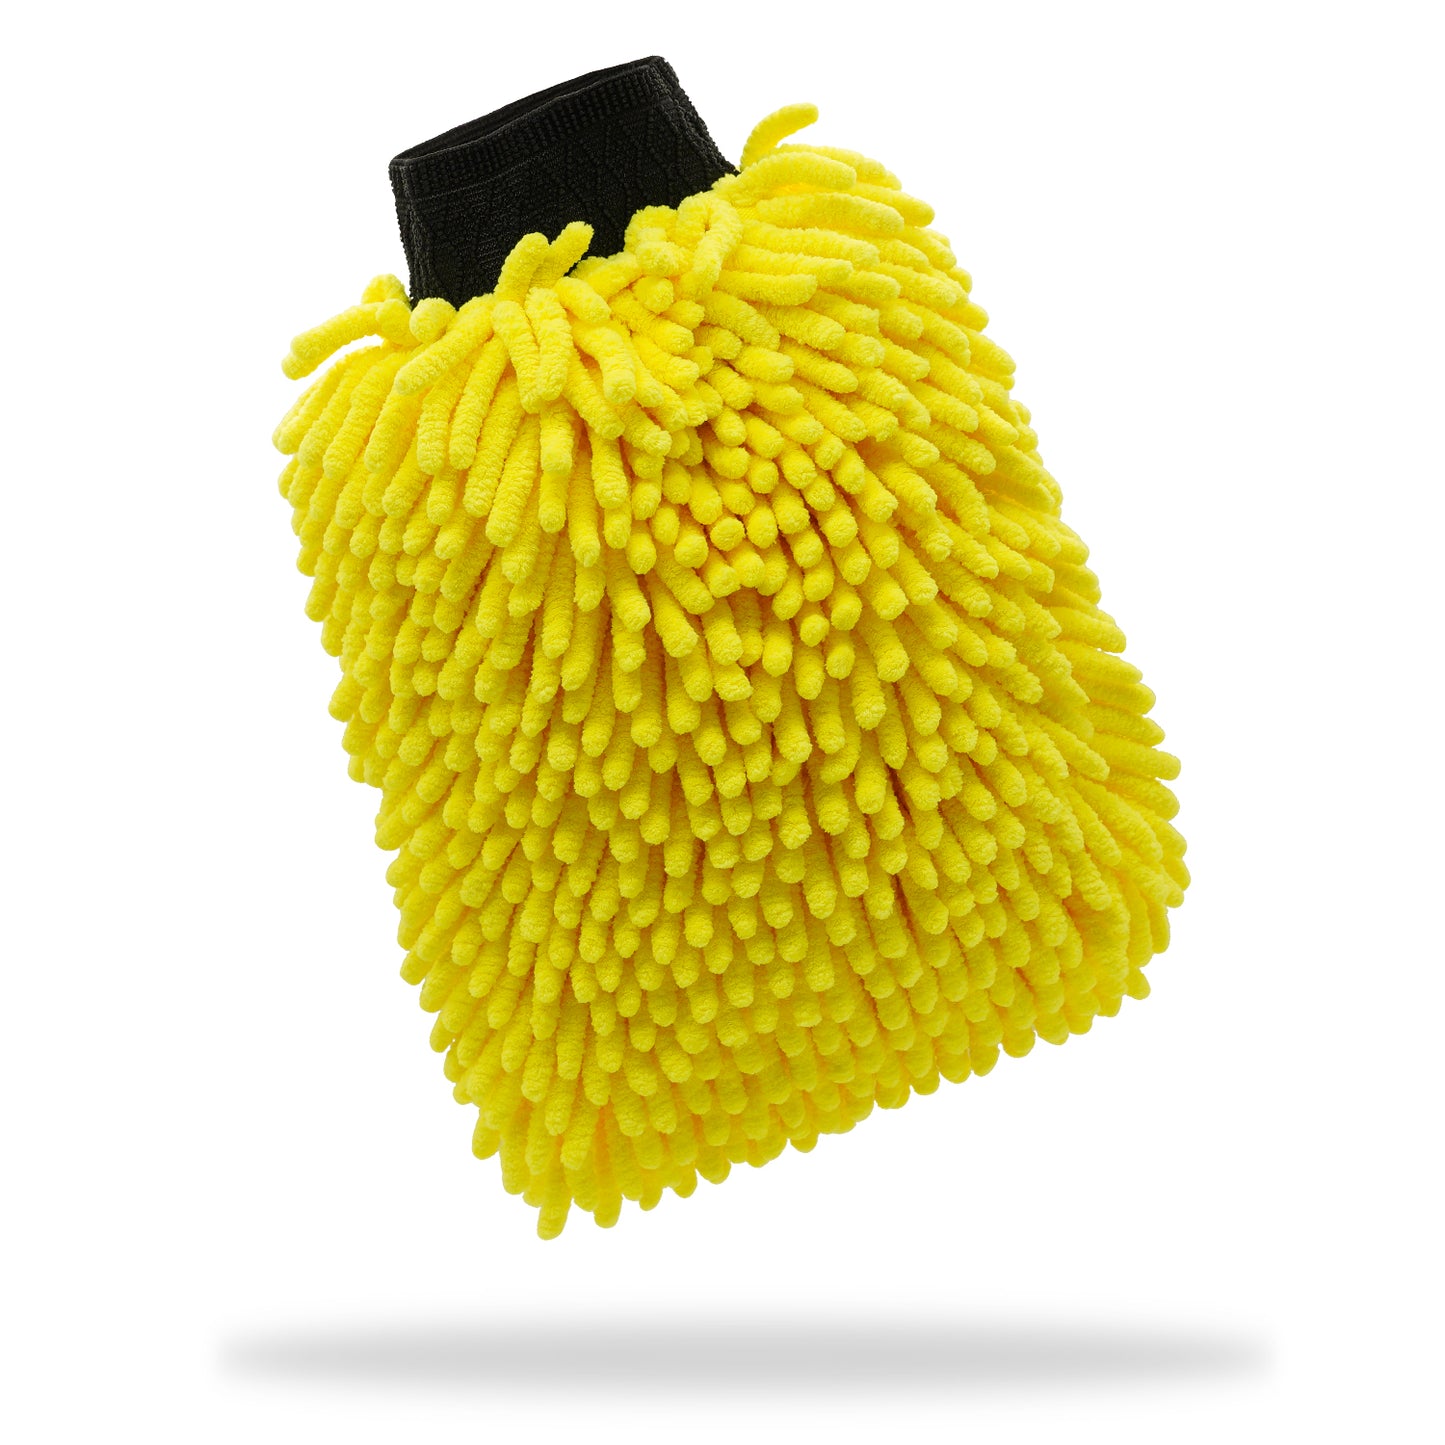 Image of the wash mitt against a white background